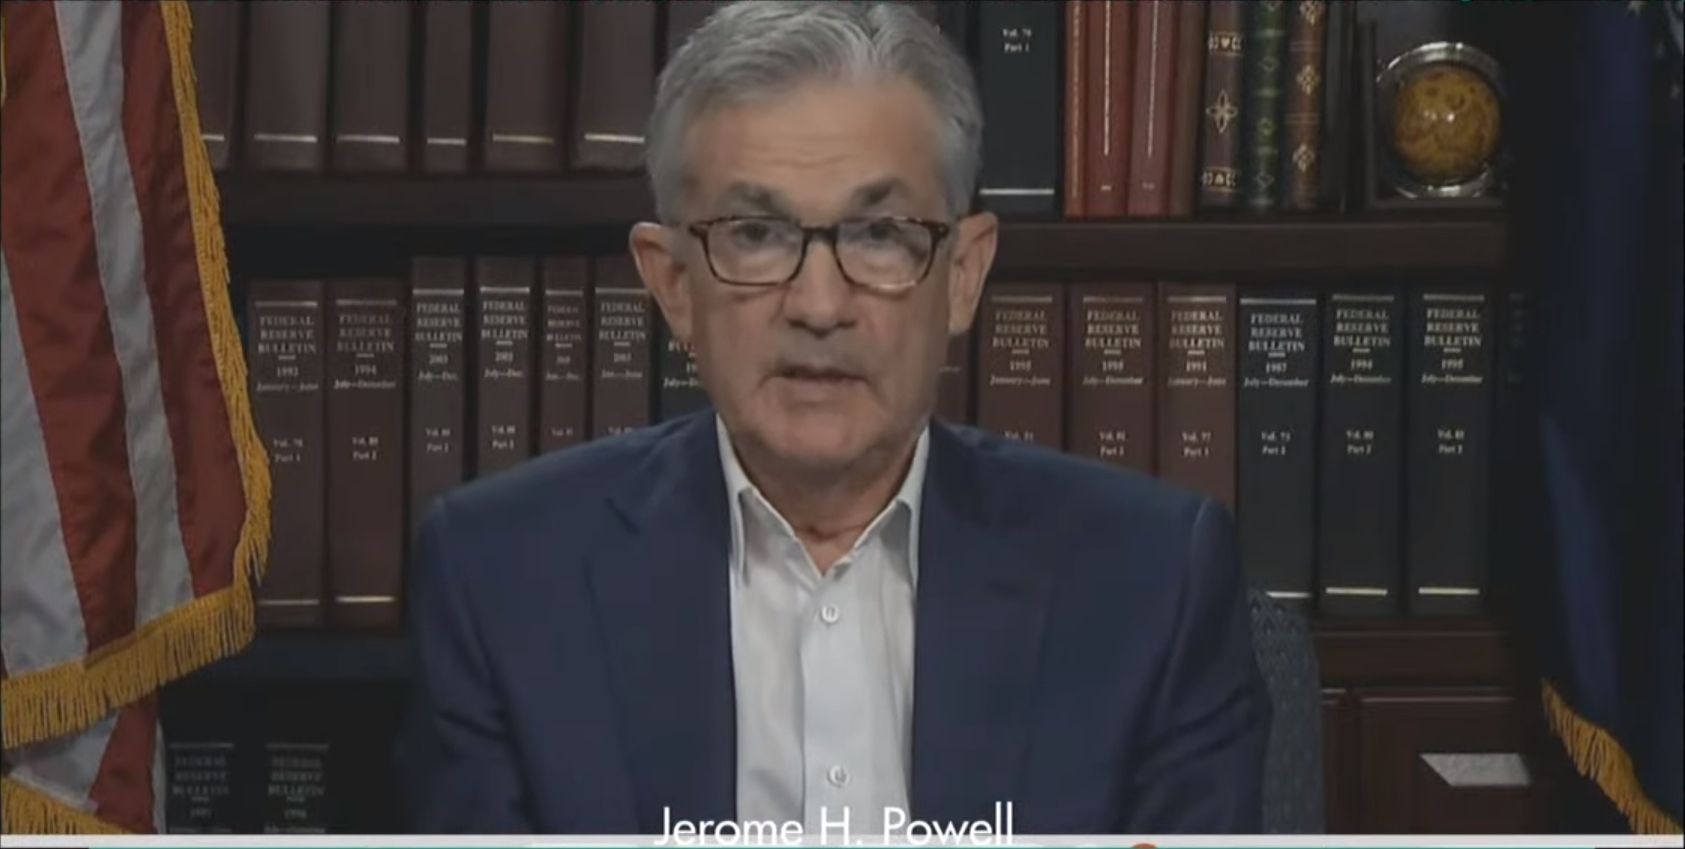 Mr.-powell,-if-you-want-higher-inflation,-give-people-money